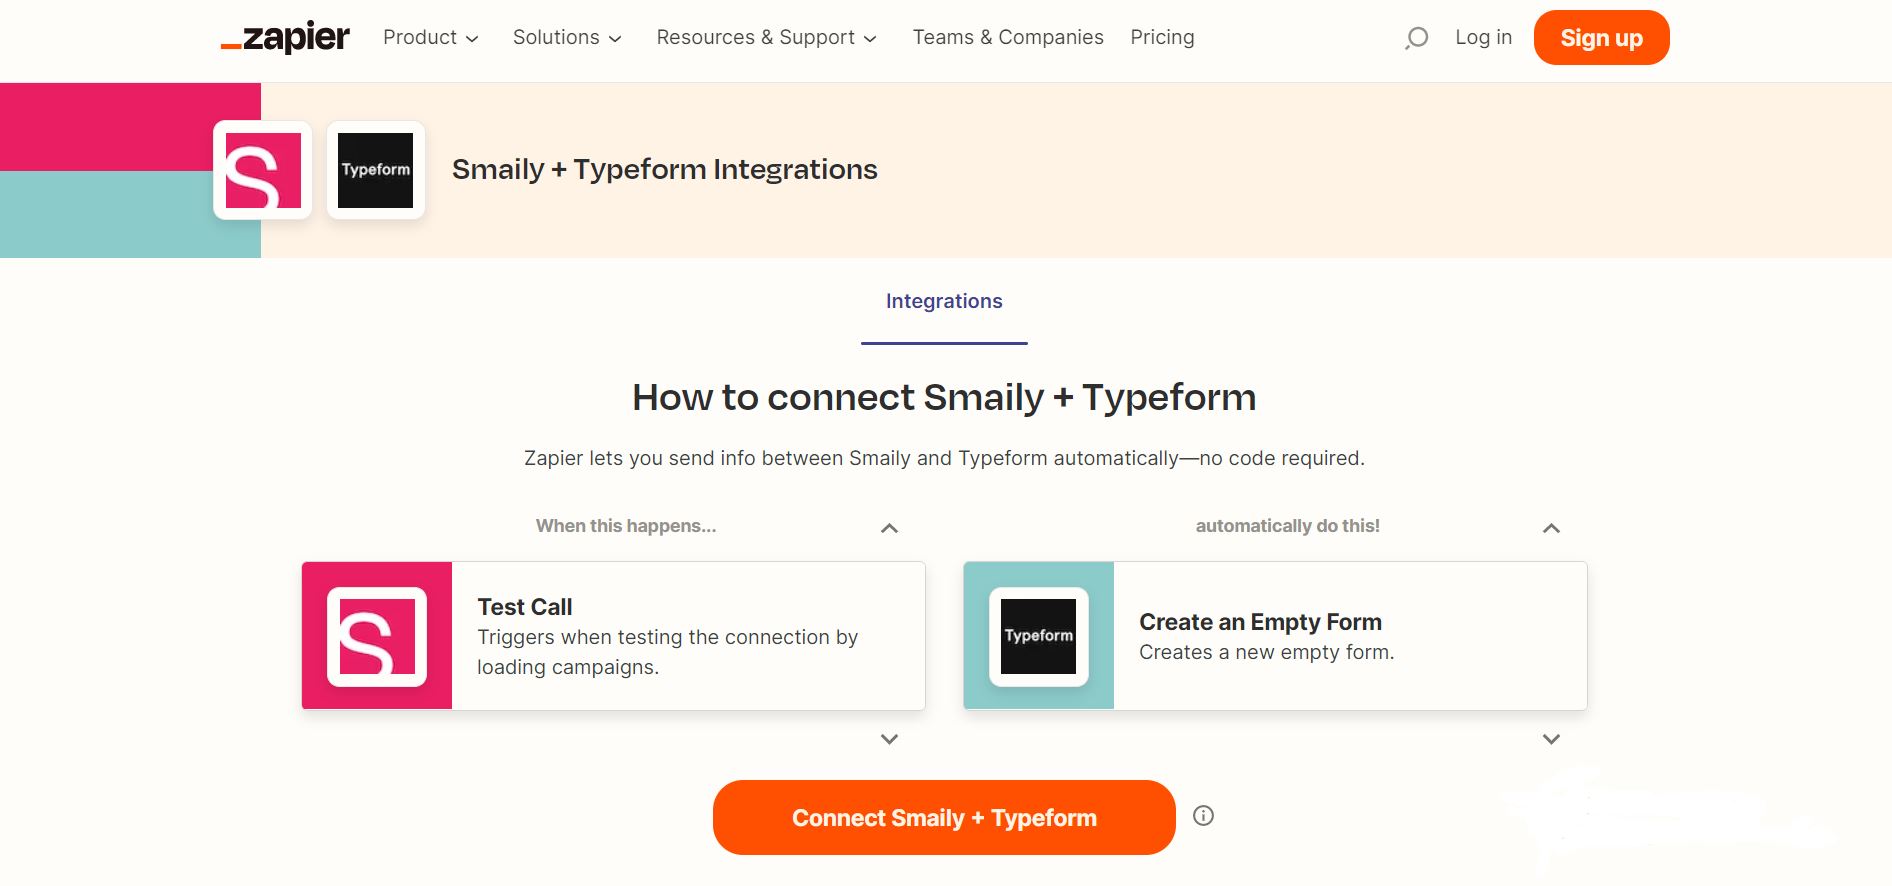 How to connect Smaily and Typeform